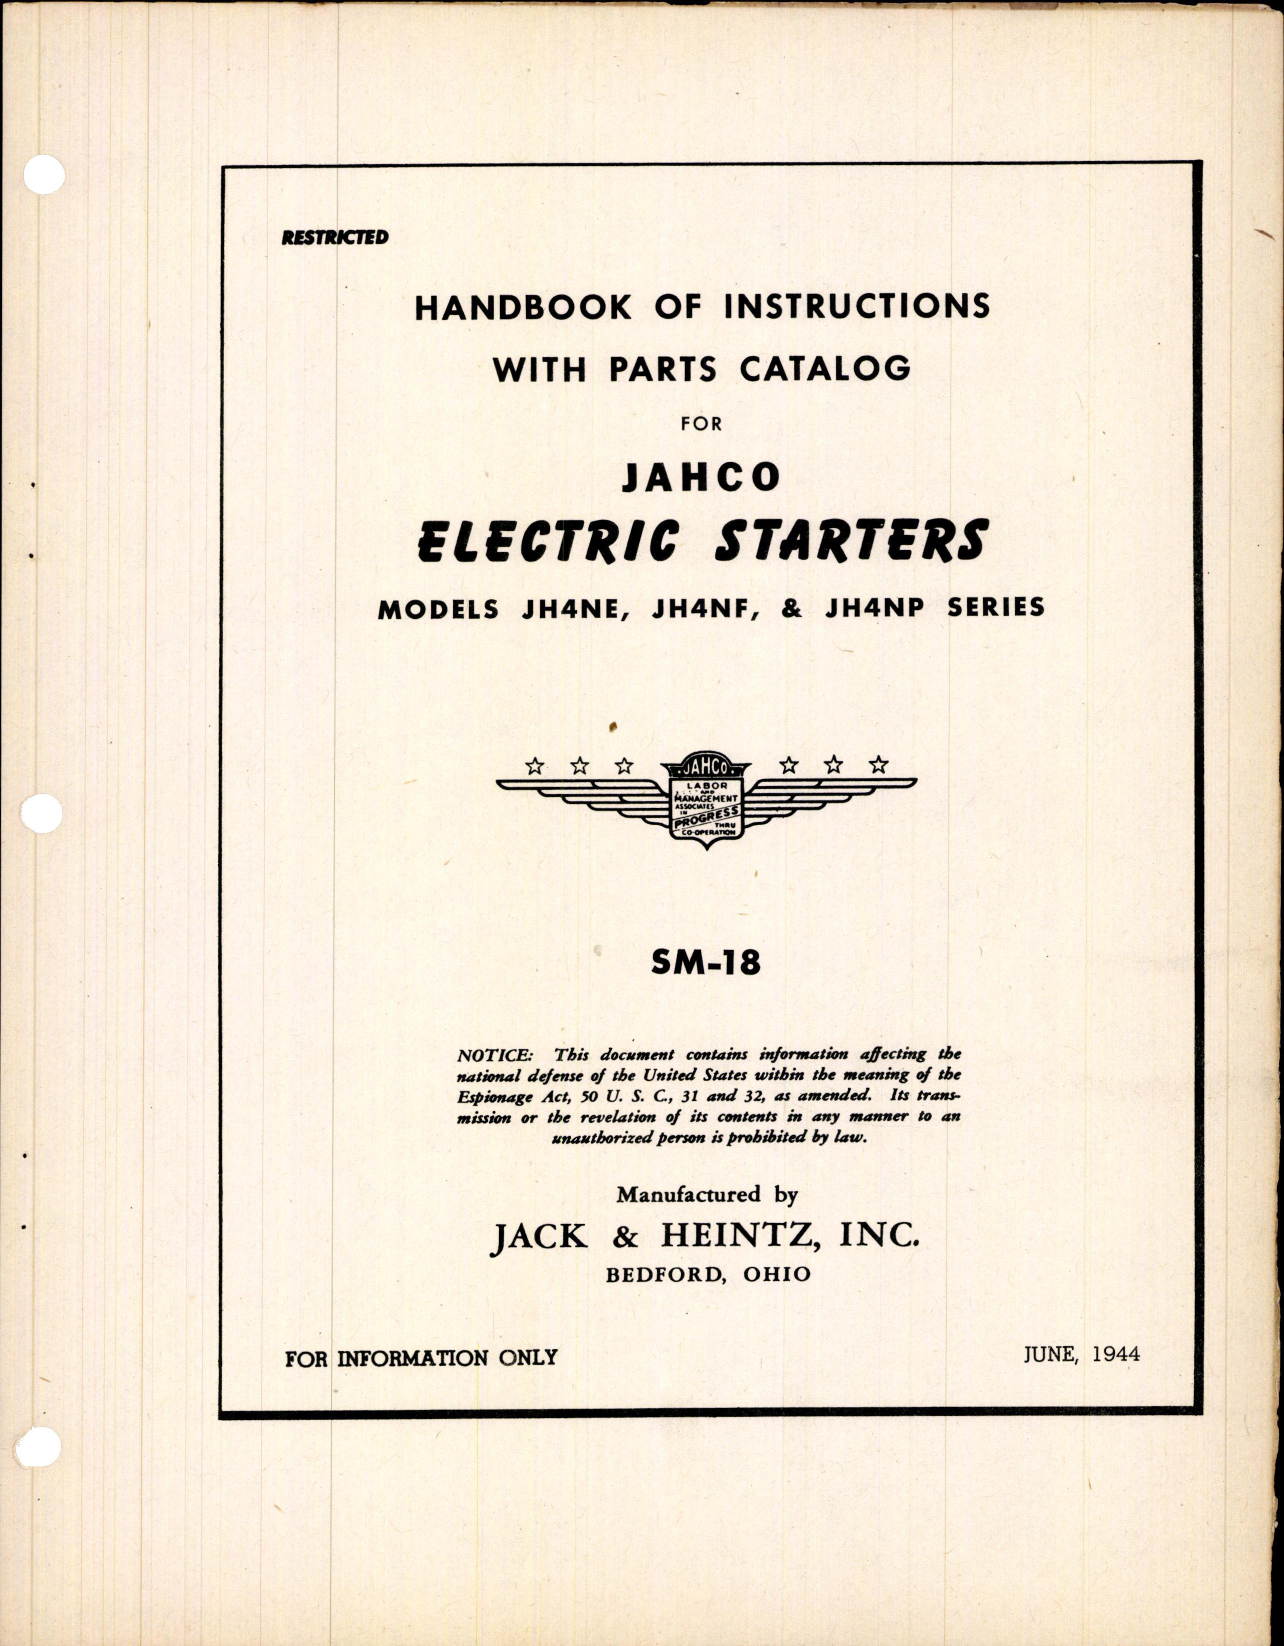 Sample page 3 from AirCorps Library document: Handbook of Instructions with Parts Catalog for Jahco Electric Starters Models JH4NE, JH4NF, and JH4NP Series